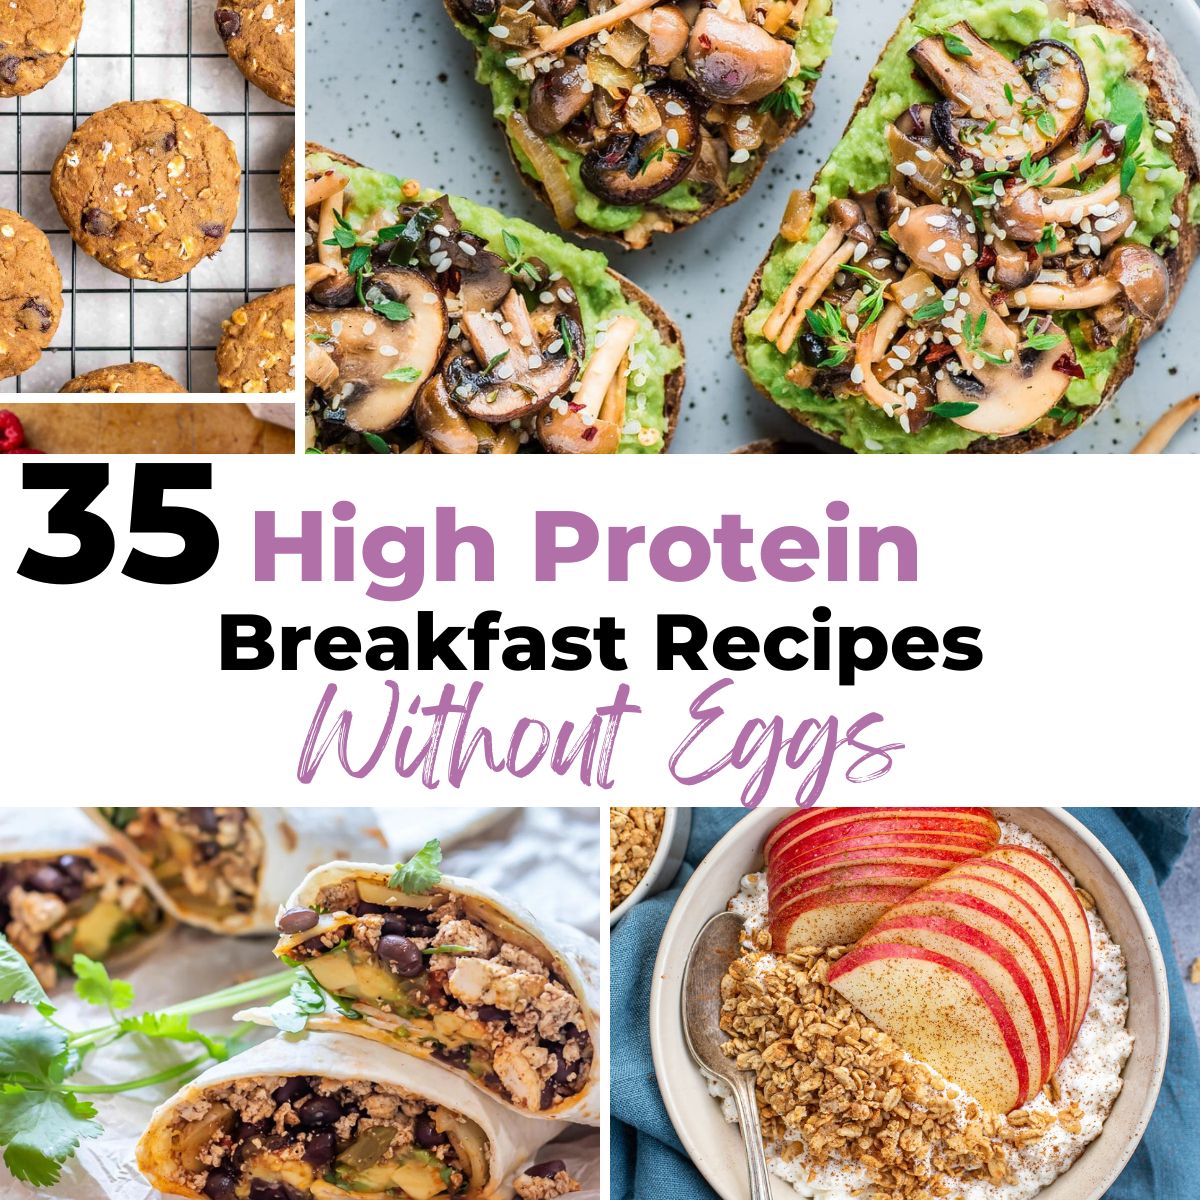 35 high protein breakfast recipes without eggs with images of breakfast burritos, apple cinnamon cottage cheese bowl, mushroom avocado toast, and breakfast cookies. 